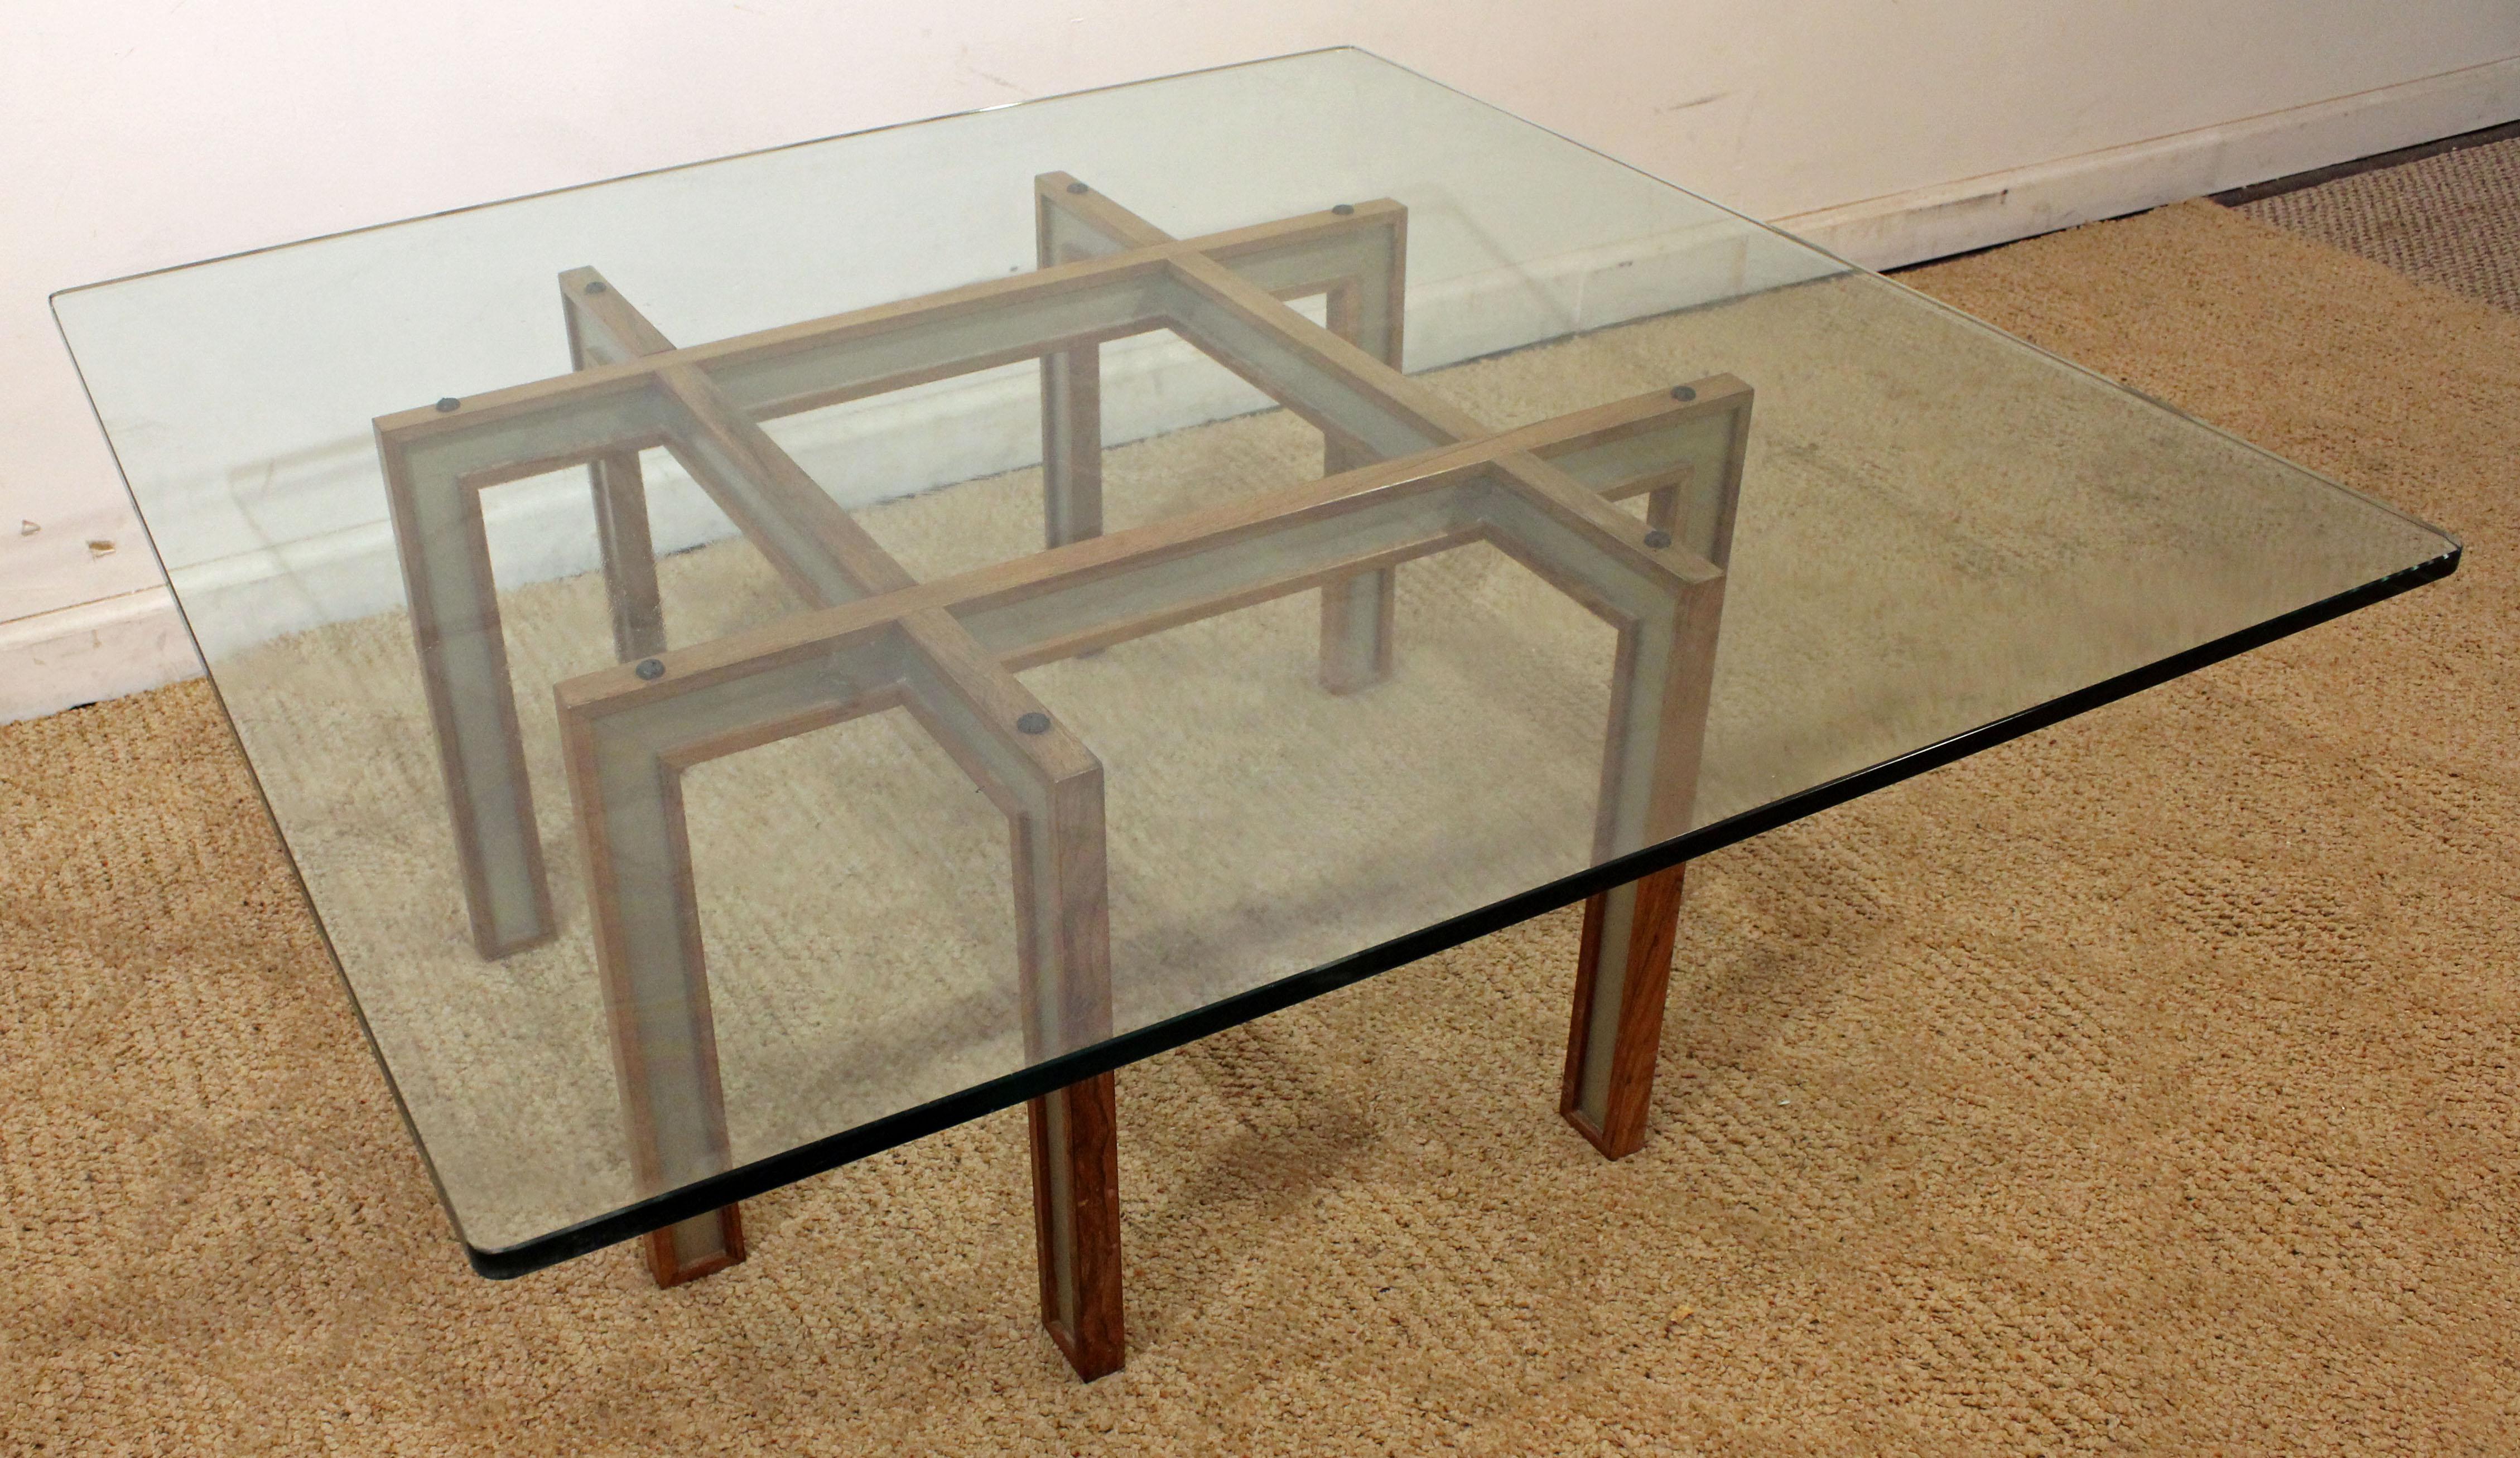 Offered is a very unique Mid-Century Modern coffee table. It has a wooden or aluminium base with a glass top. The table is in great condition, shows minor age wear. It is not marked.

Dimension:
42